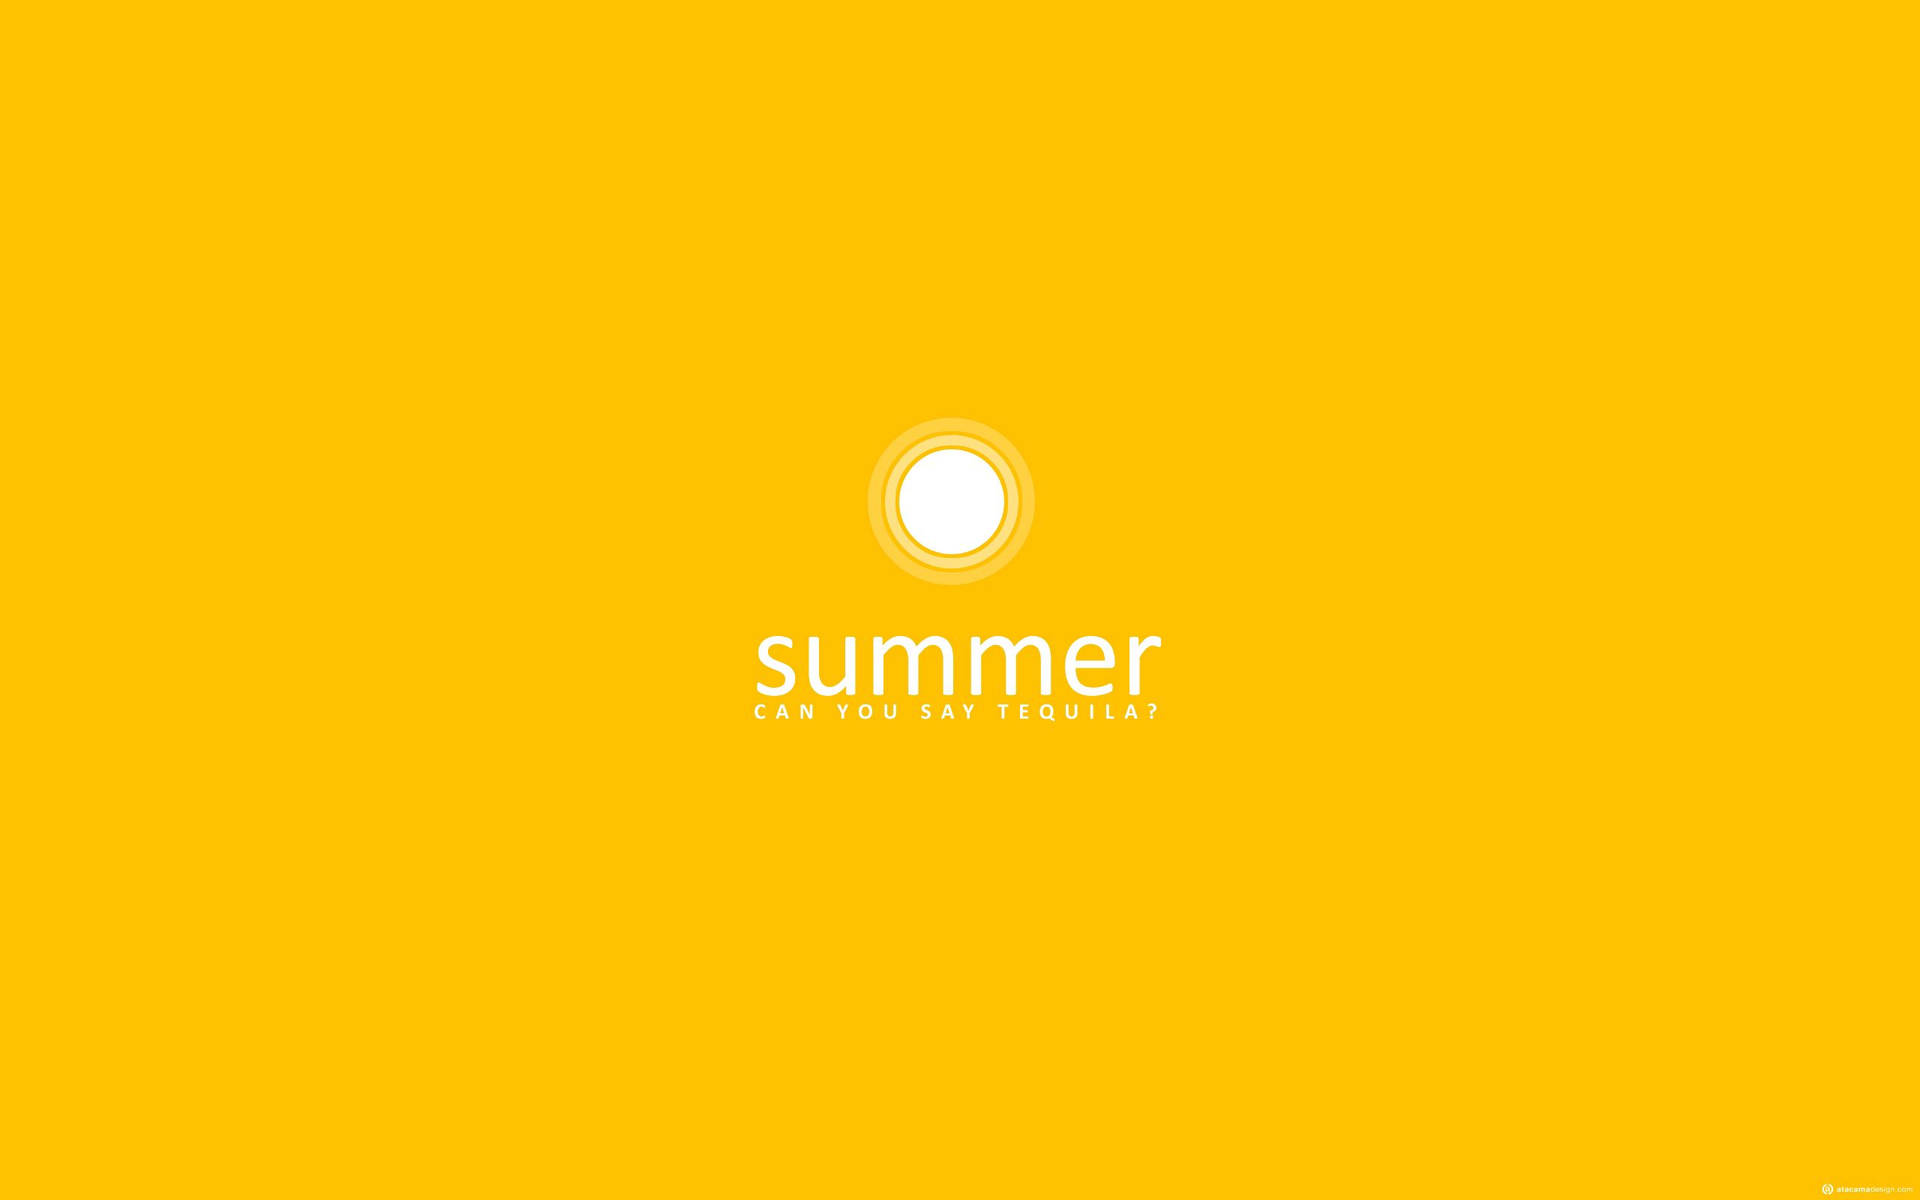 Make your days bright and sunny this summer! Wallpaper